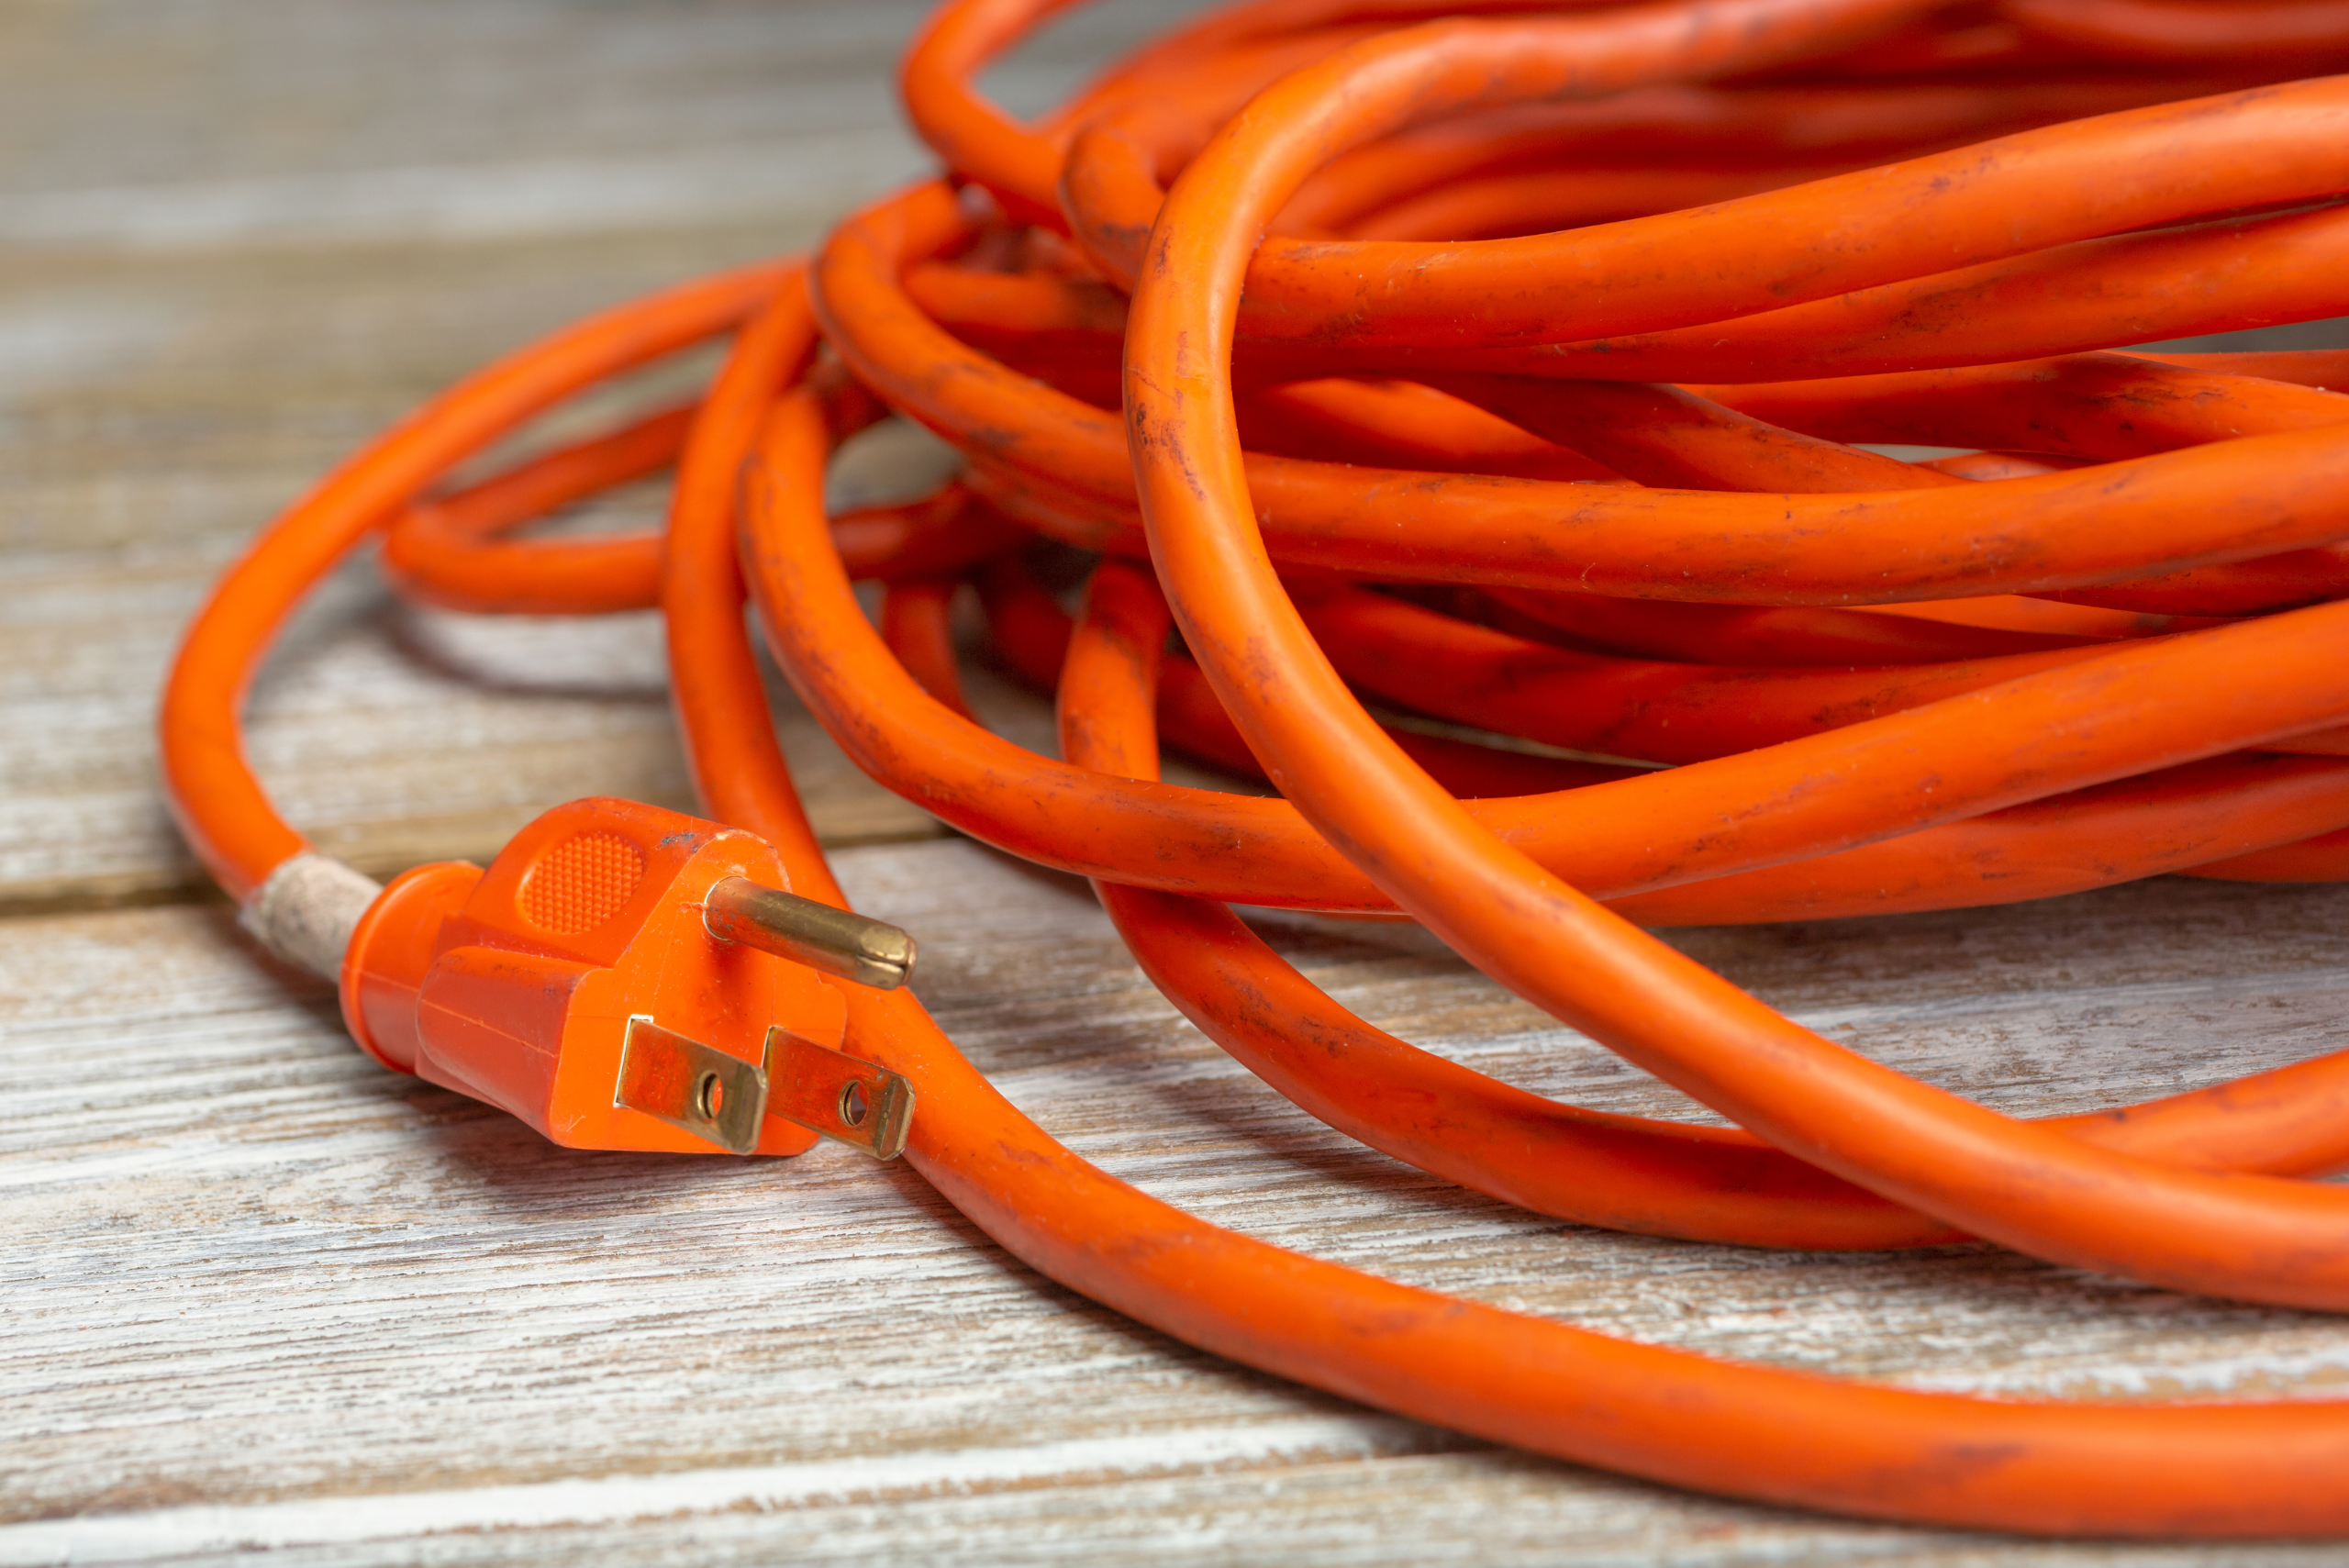 Orange extension cord on a wooden floor.